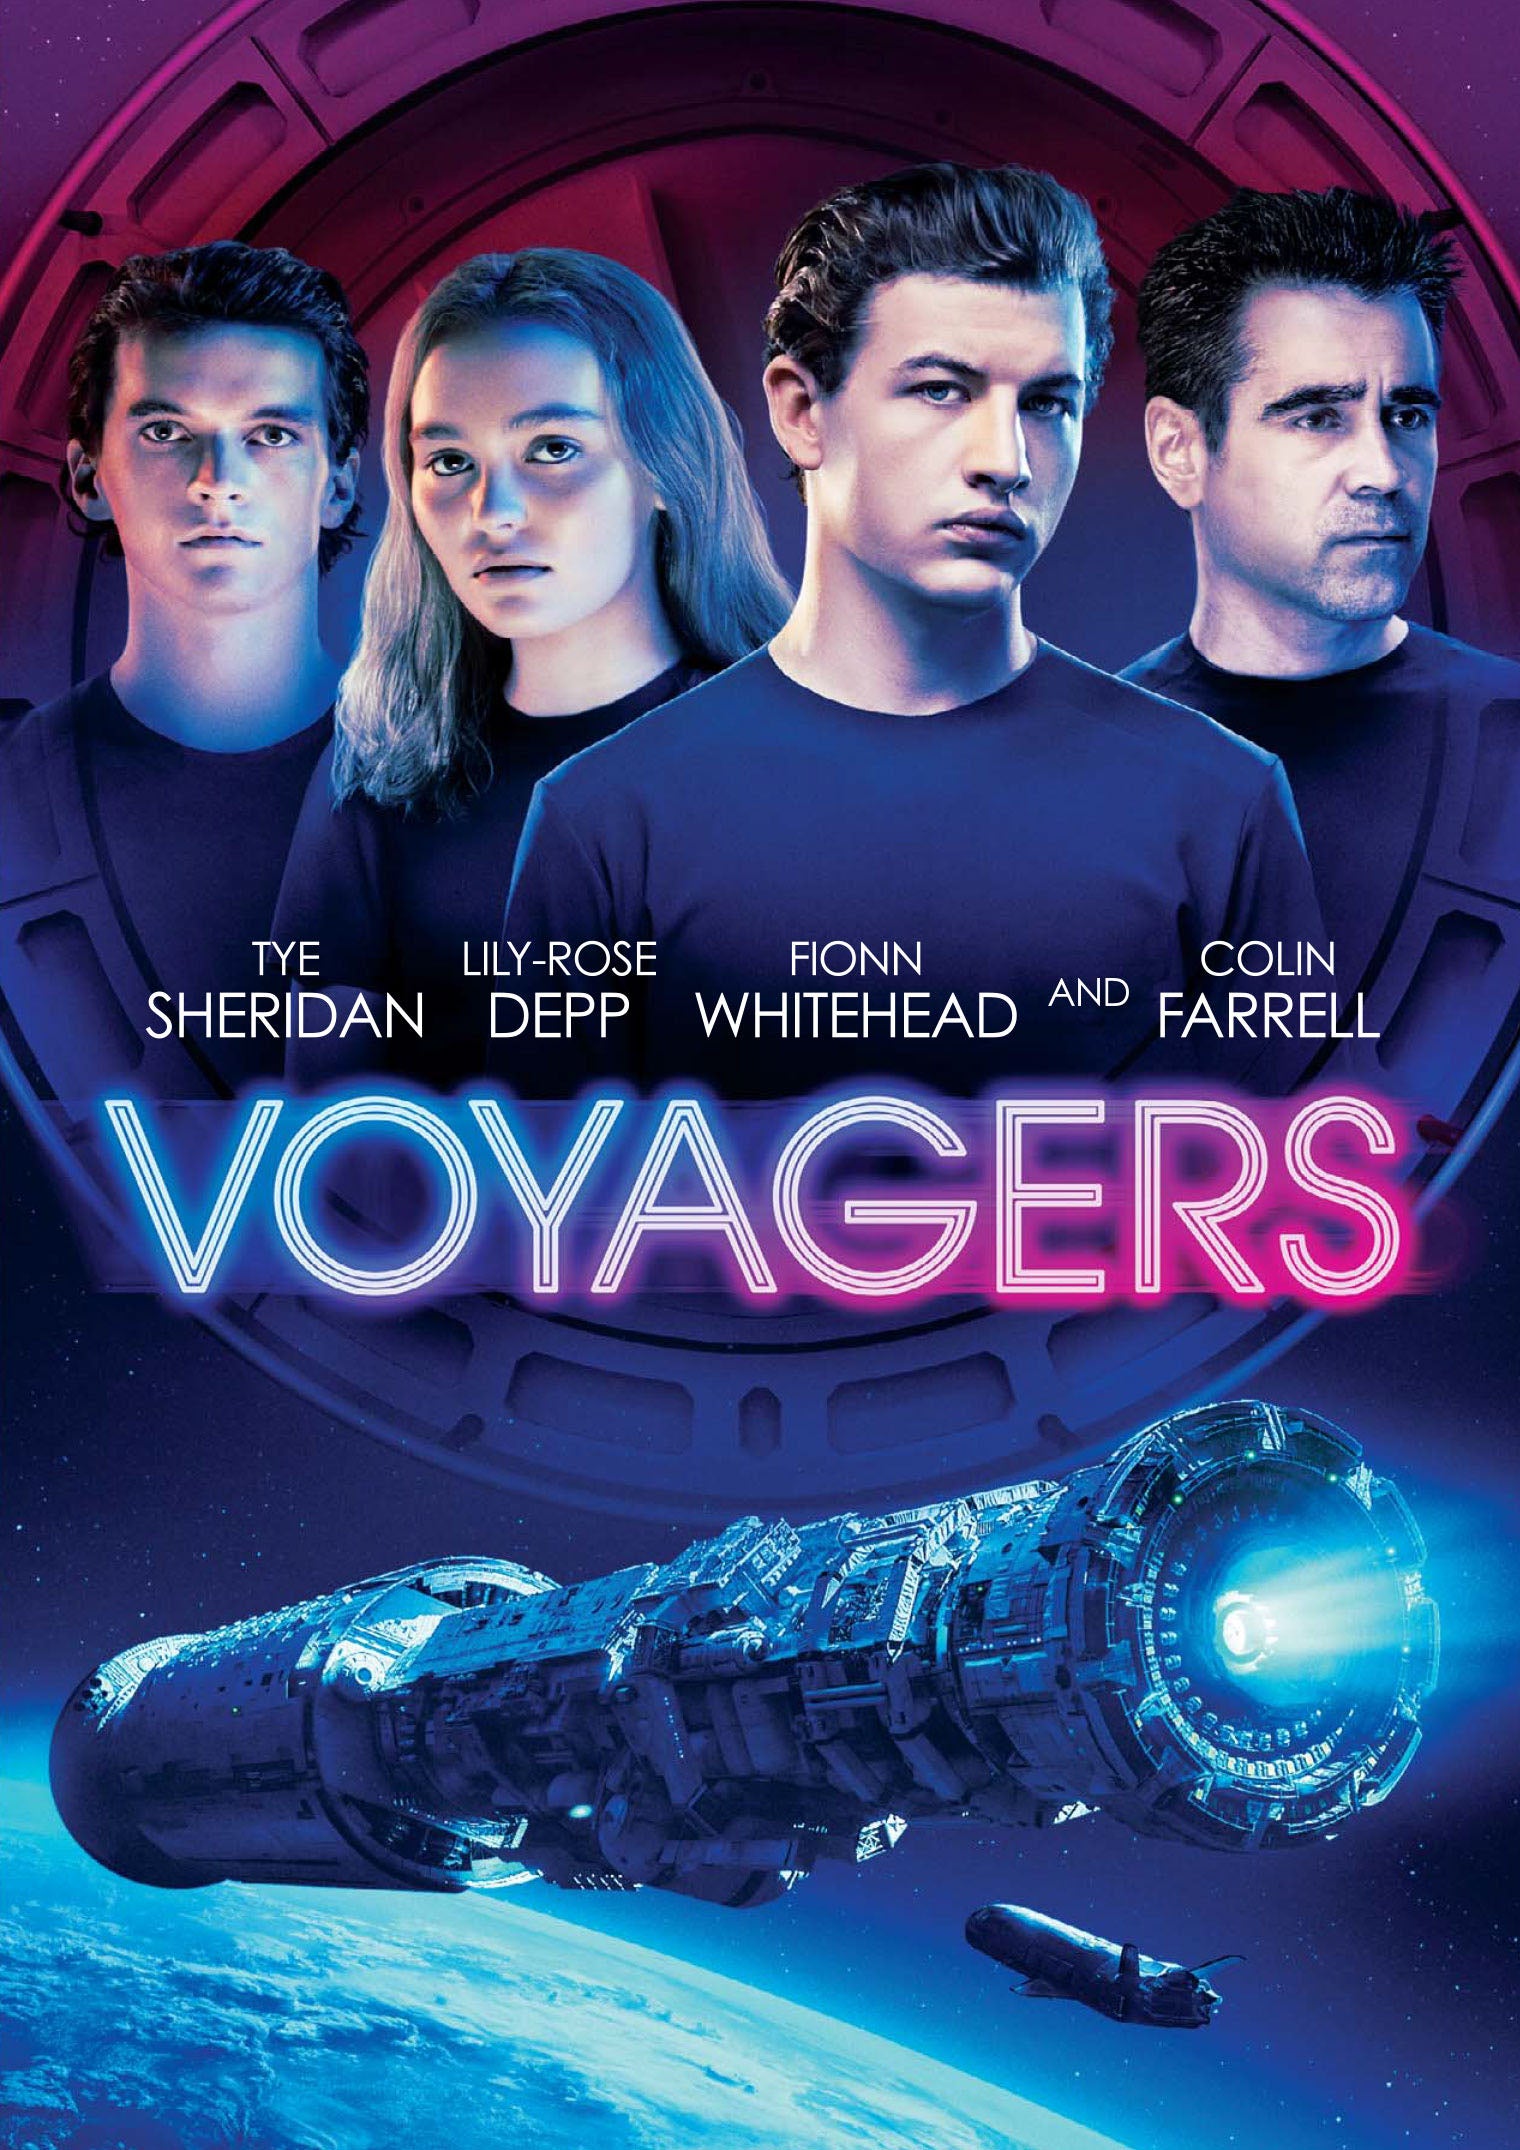 Voyagers cover art